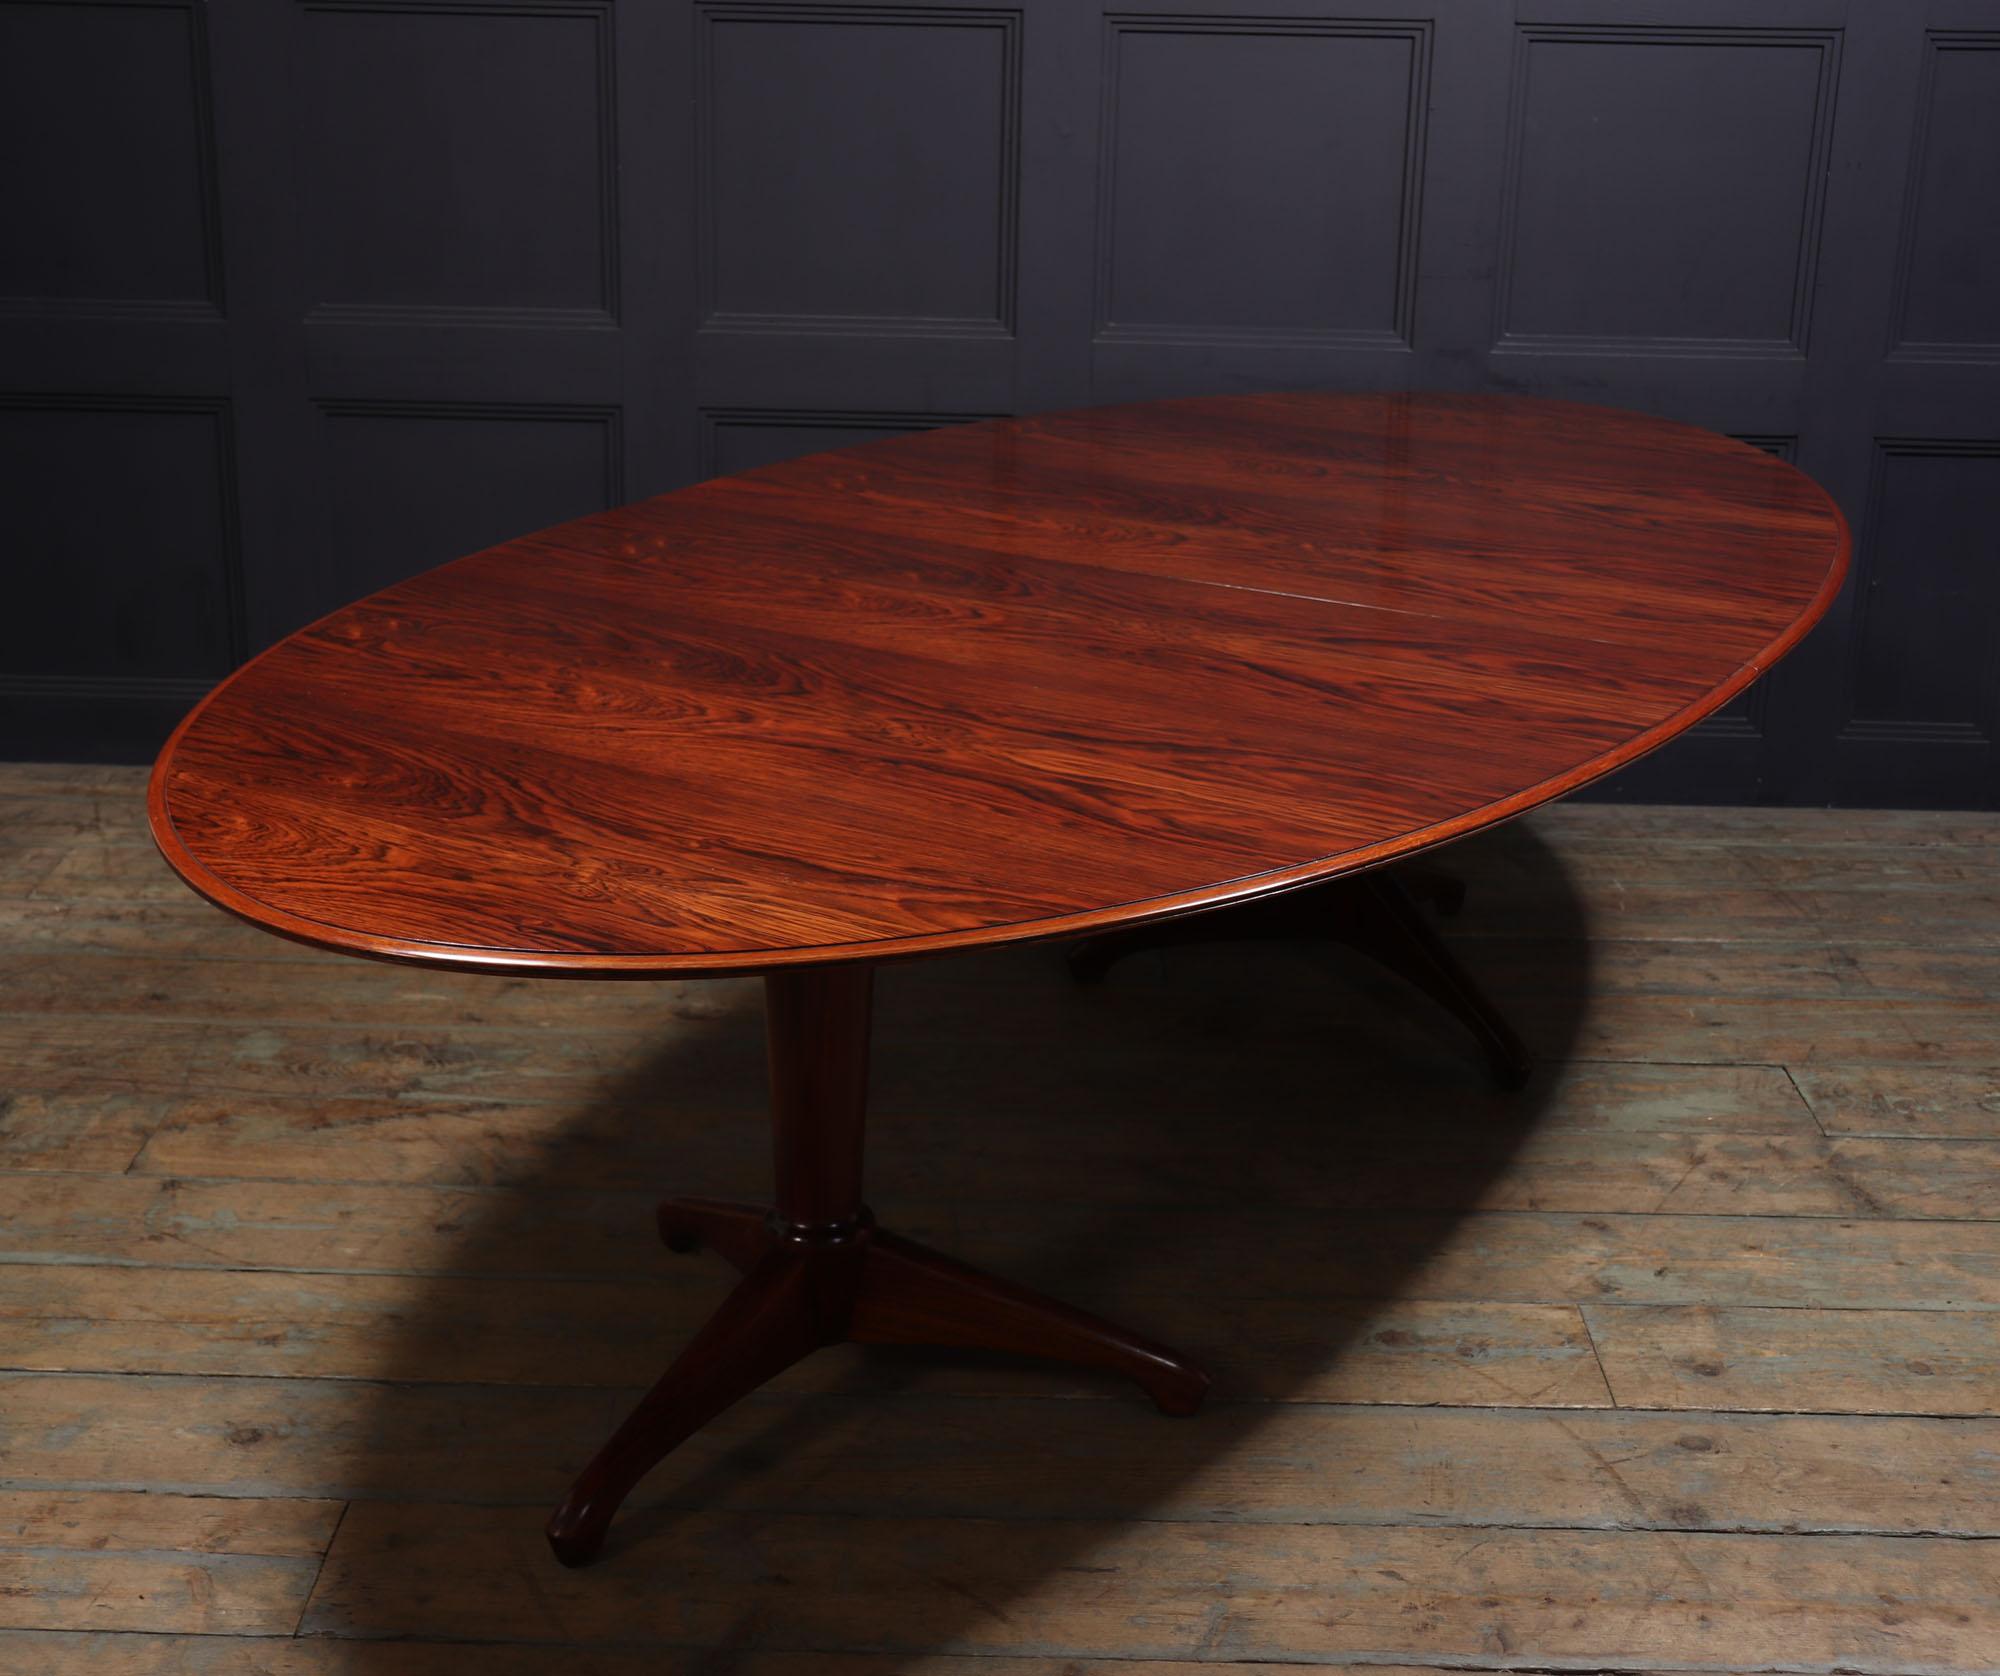 Dining table by andrew milne
A rosewood oval two pedestal extending dining table, circa 1954, the top with a moulded edge two sections consisting of on two tripod pedestal bases, with an additional central large leaf section, to comfortably seat 12